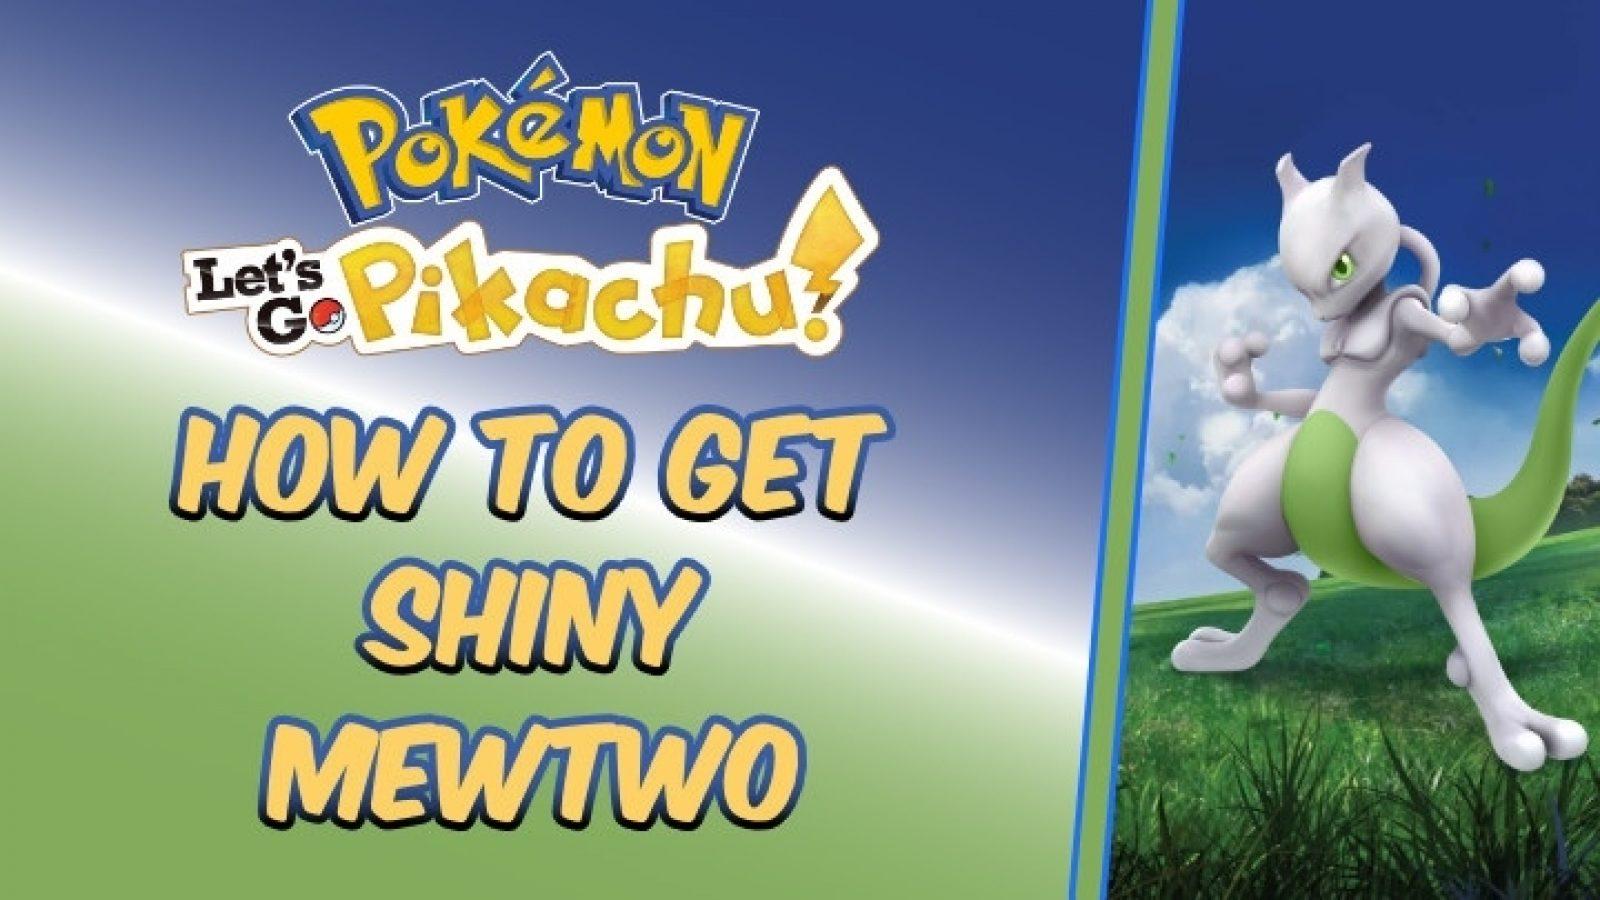 POKEMON GO - Catching Mew and Mewtwo! (Pokemon GO Catching Guide) 